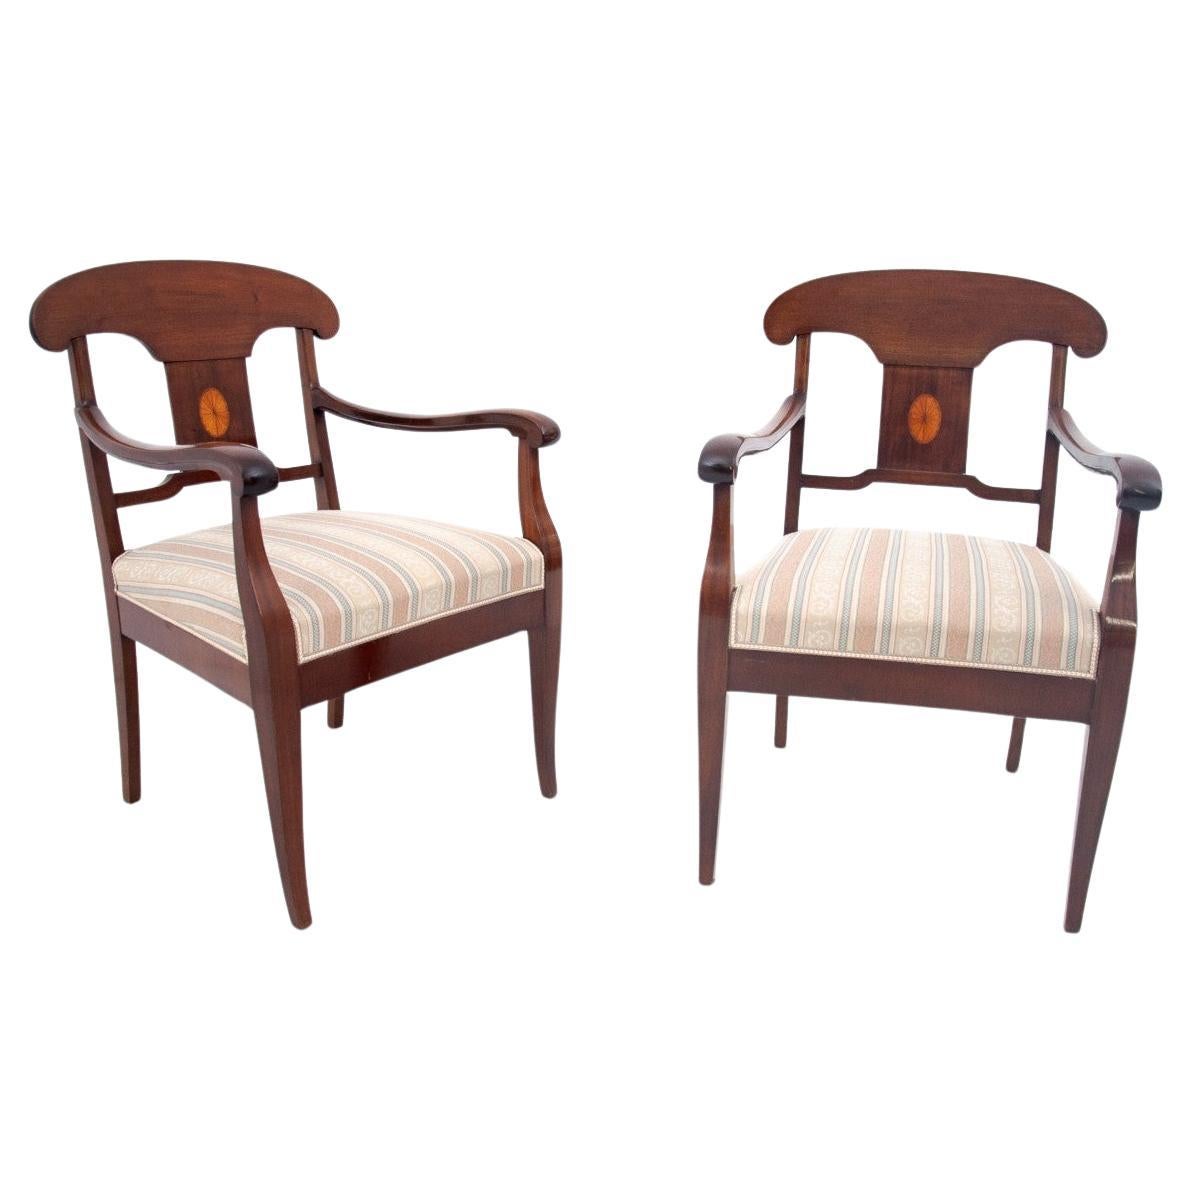 A pair of antique armchairs from around 1860, Northern Europe.